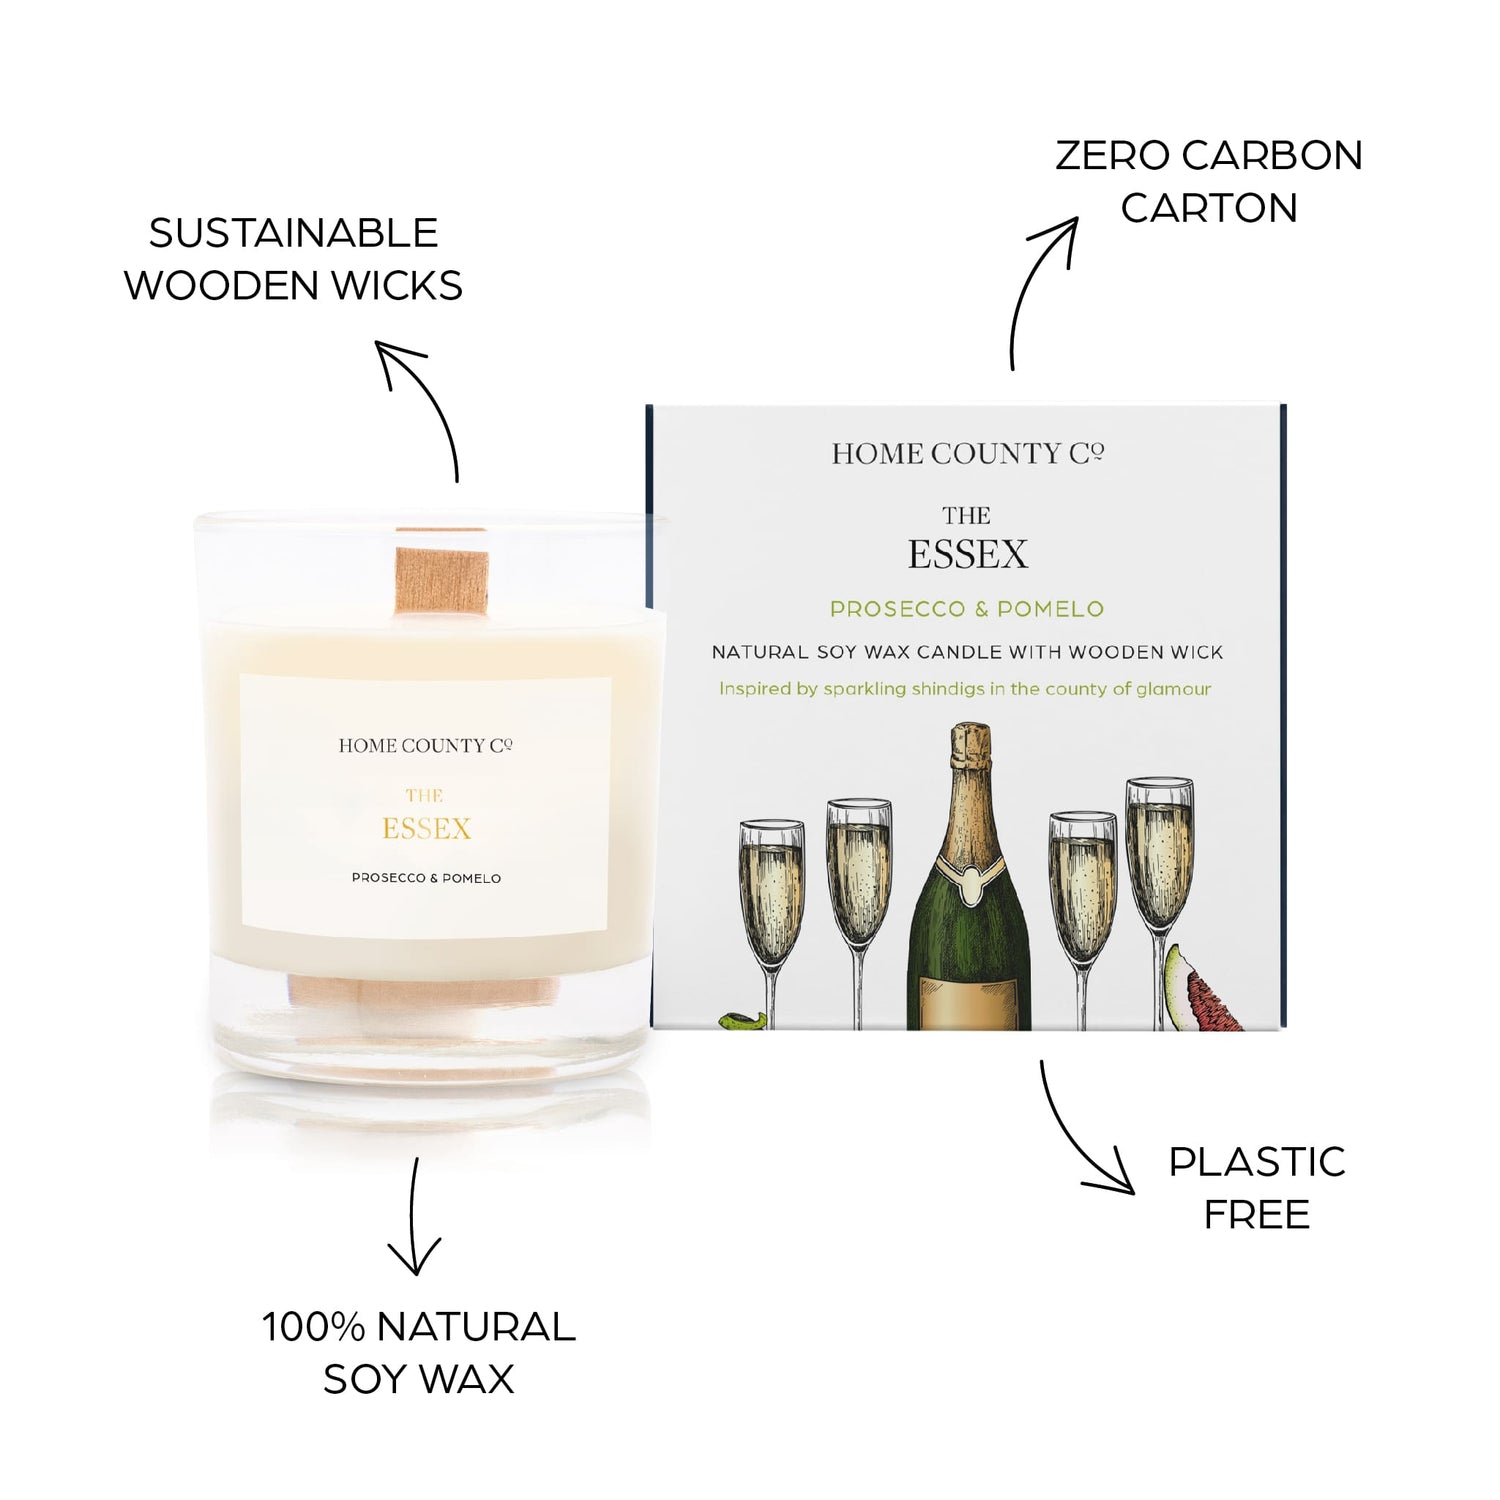 Sustainable candle credentials are shown around the prosecco scented candle image - sustainable wooden wicks, zero carbon carton, 100% natural soy wax, plastic free